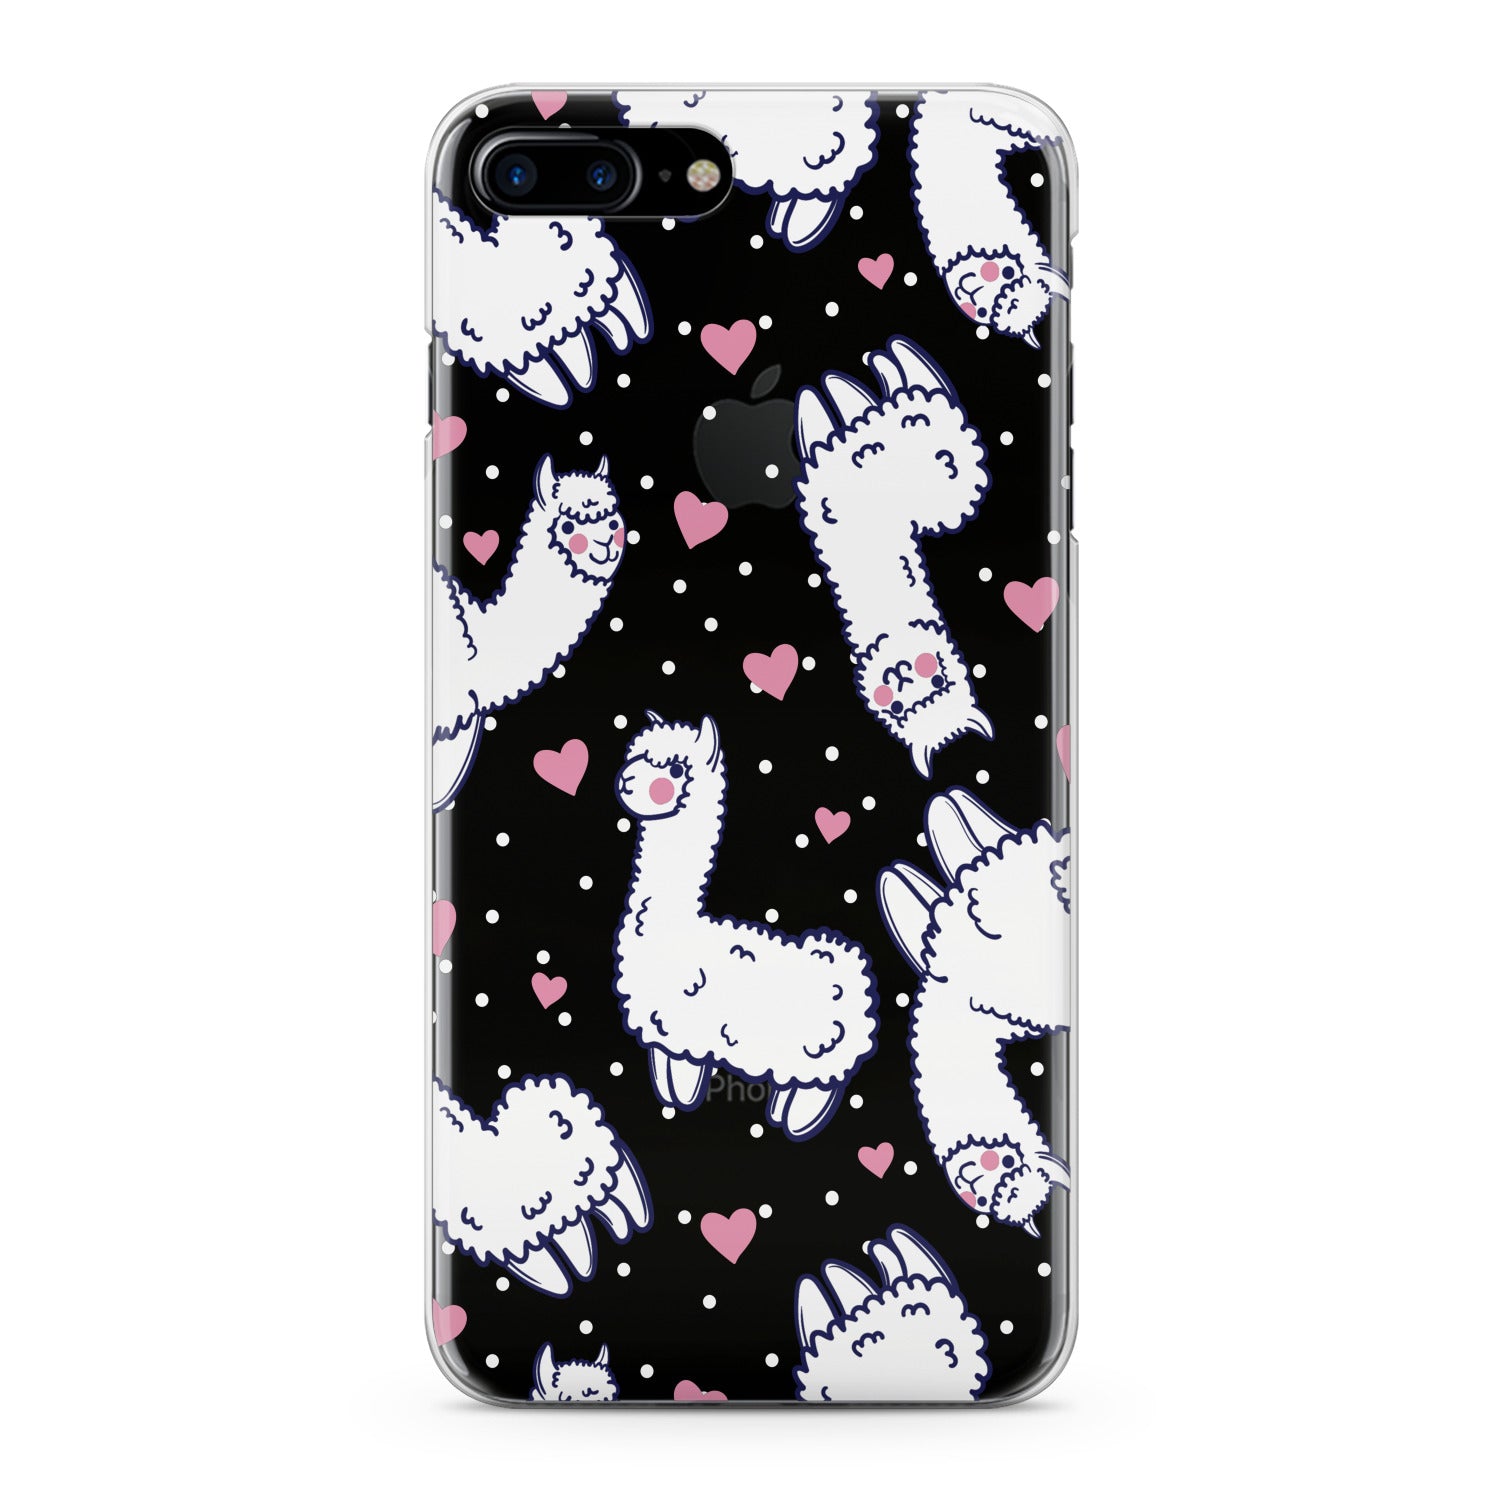 Lex Altern White Llamas Phone Case for your iPhone & Android phone.